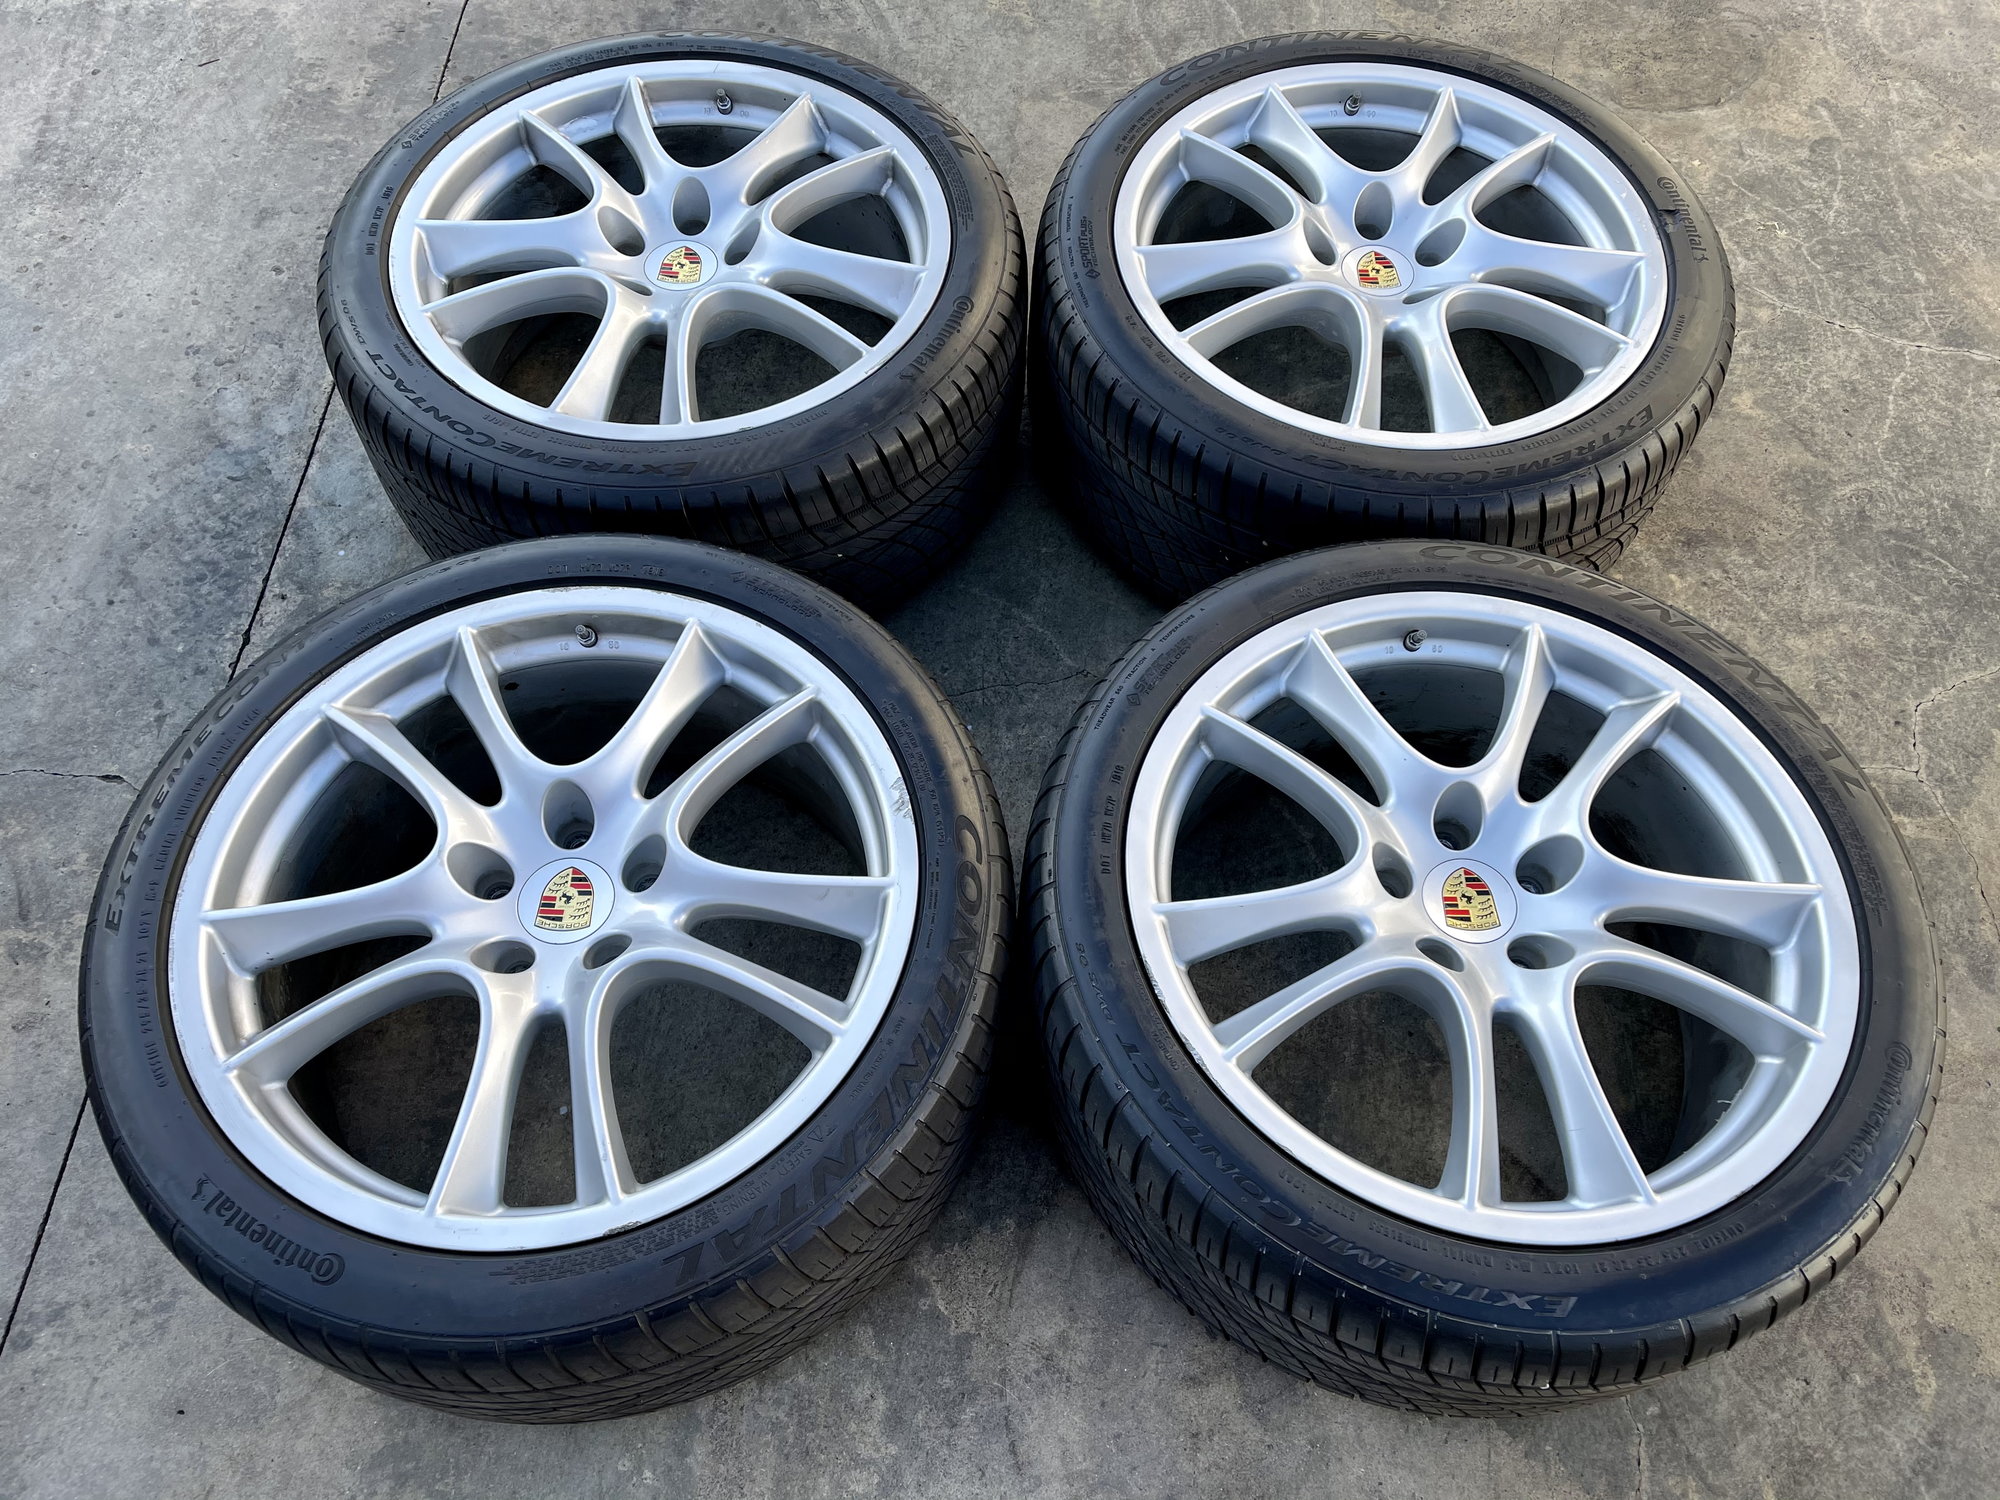 Wheels and Tires/Axles - 21” Cayenne Sport / GTS Wheel, Tires, TPMS Set - Used - 2004 to 2010 Porsche Cayenne - Los Angeles, CA 90001, United States